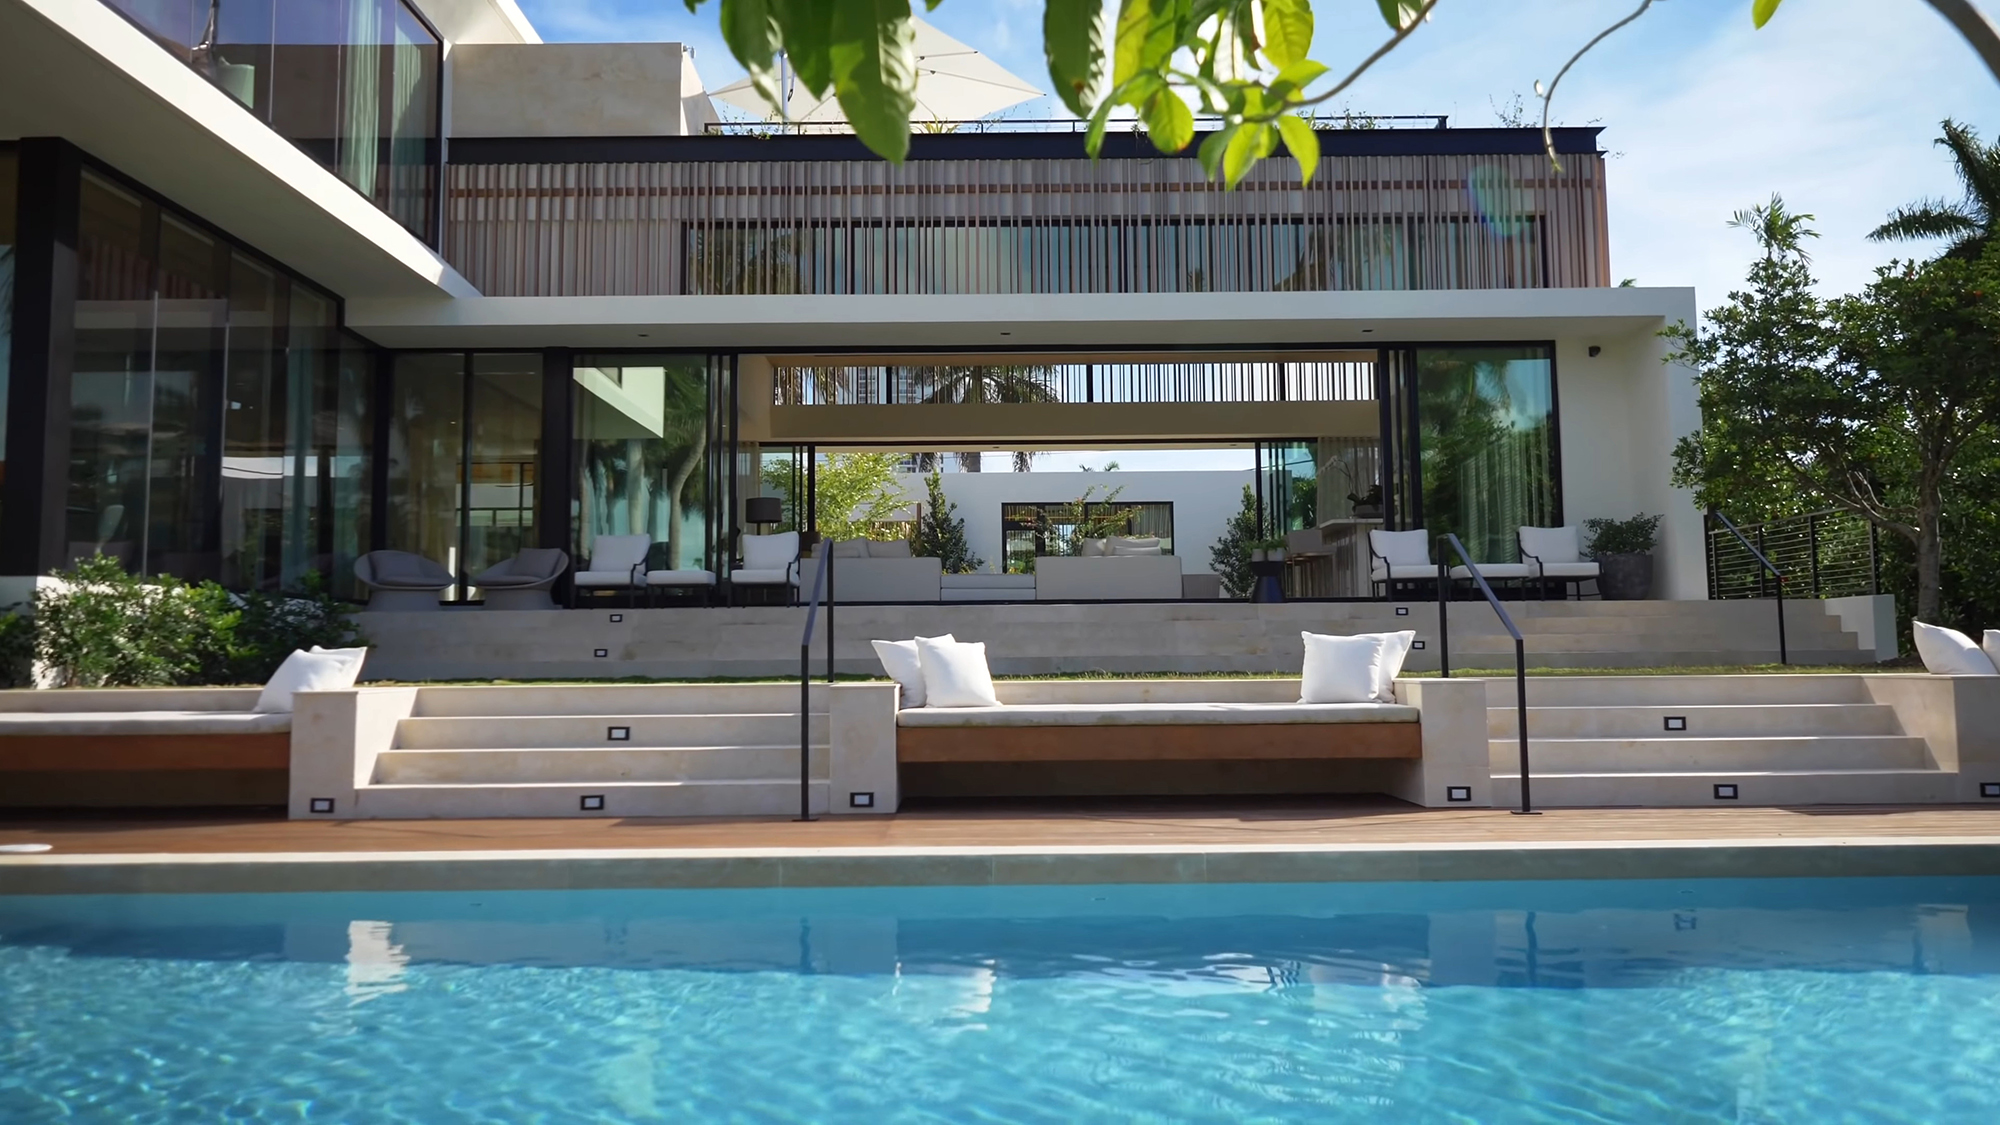 Poolside view of this contemporary home with flat rooftop decks and built in planters.